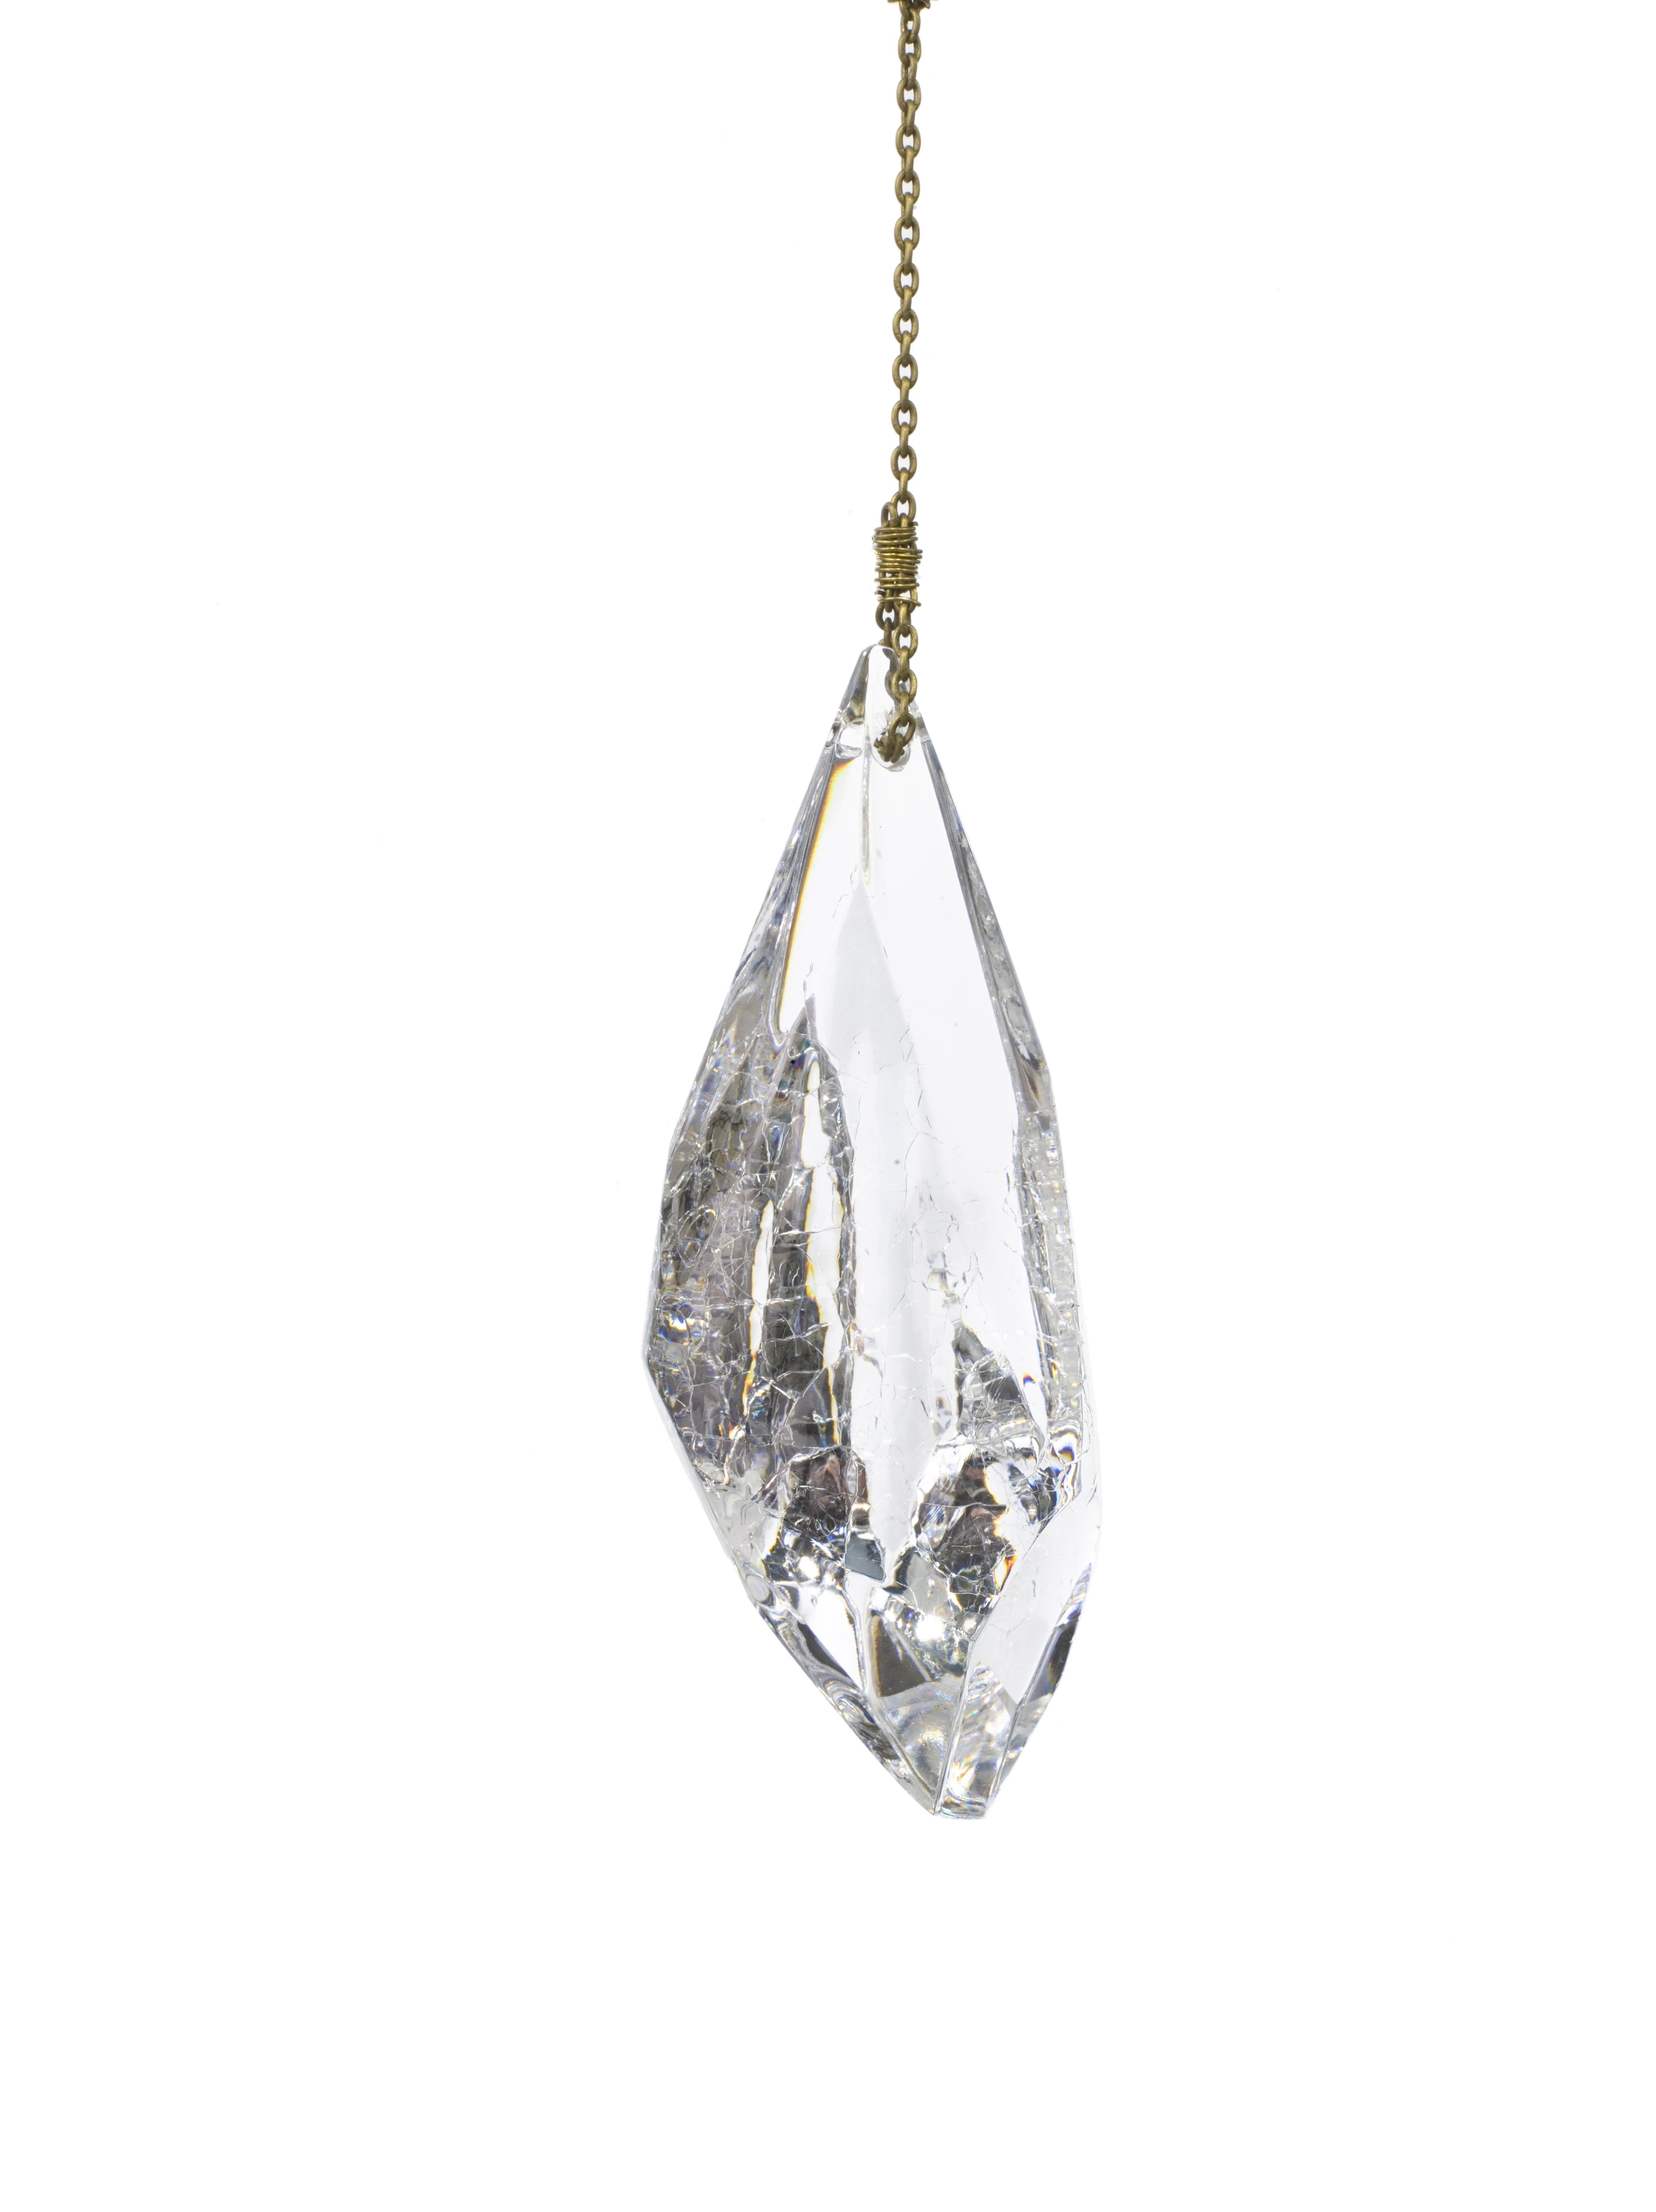 Italian Griffe Pendant Light, Hand-Silvered Glass with Raw Silk and Crystal Prism